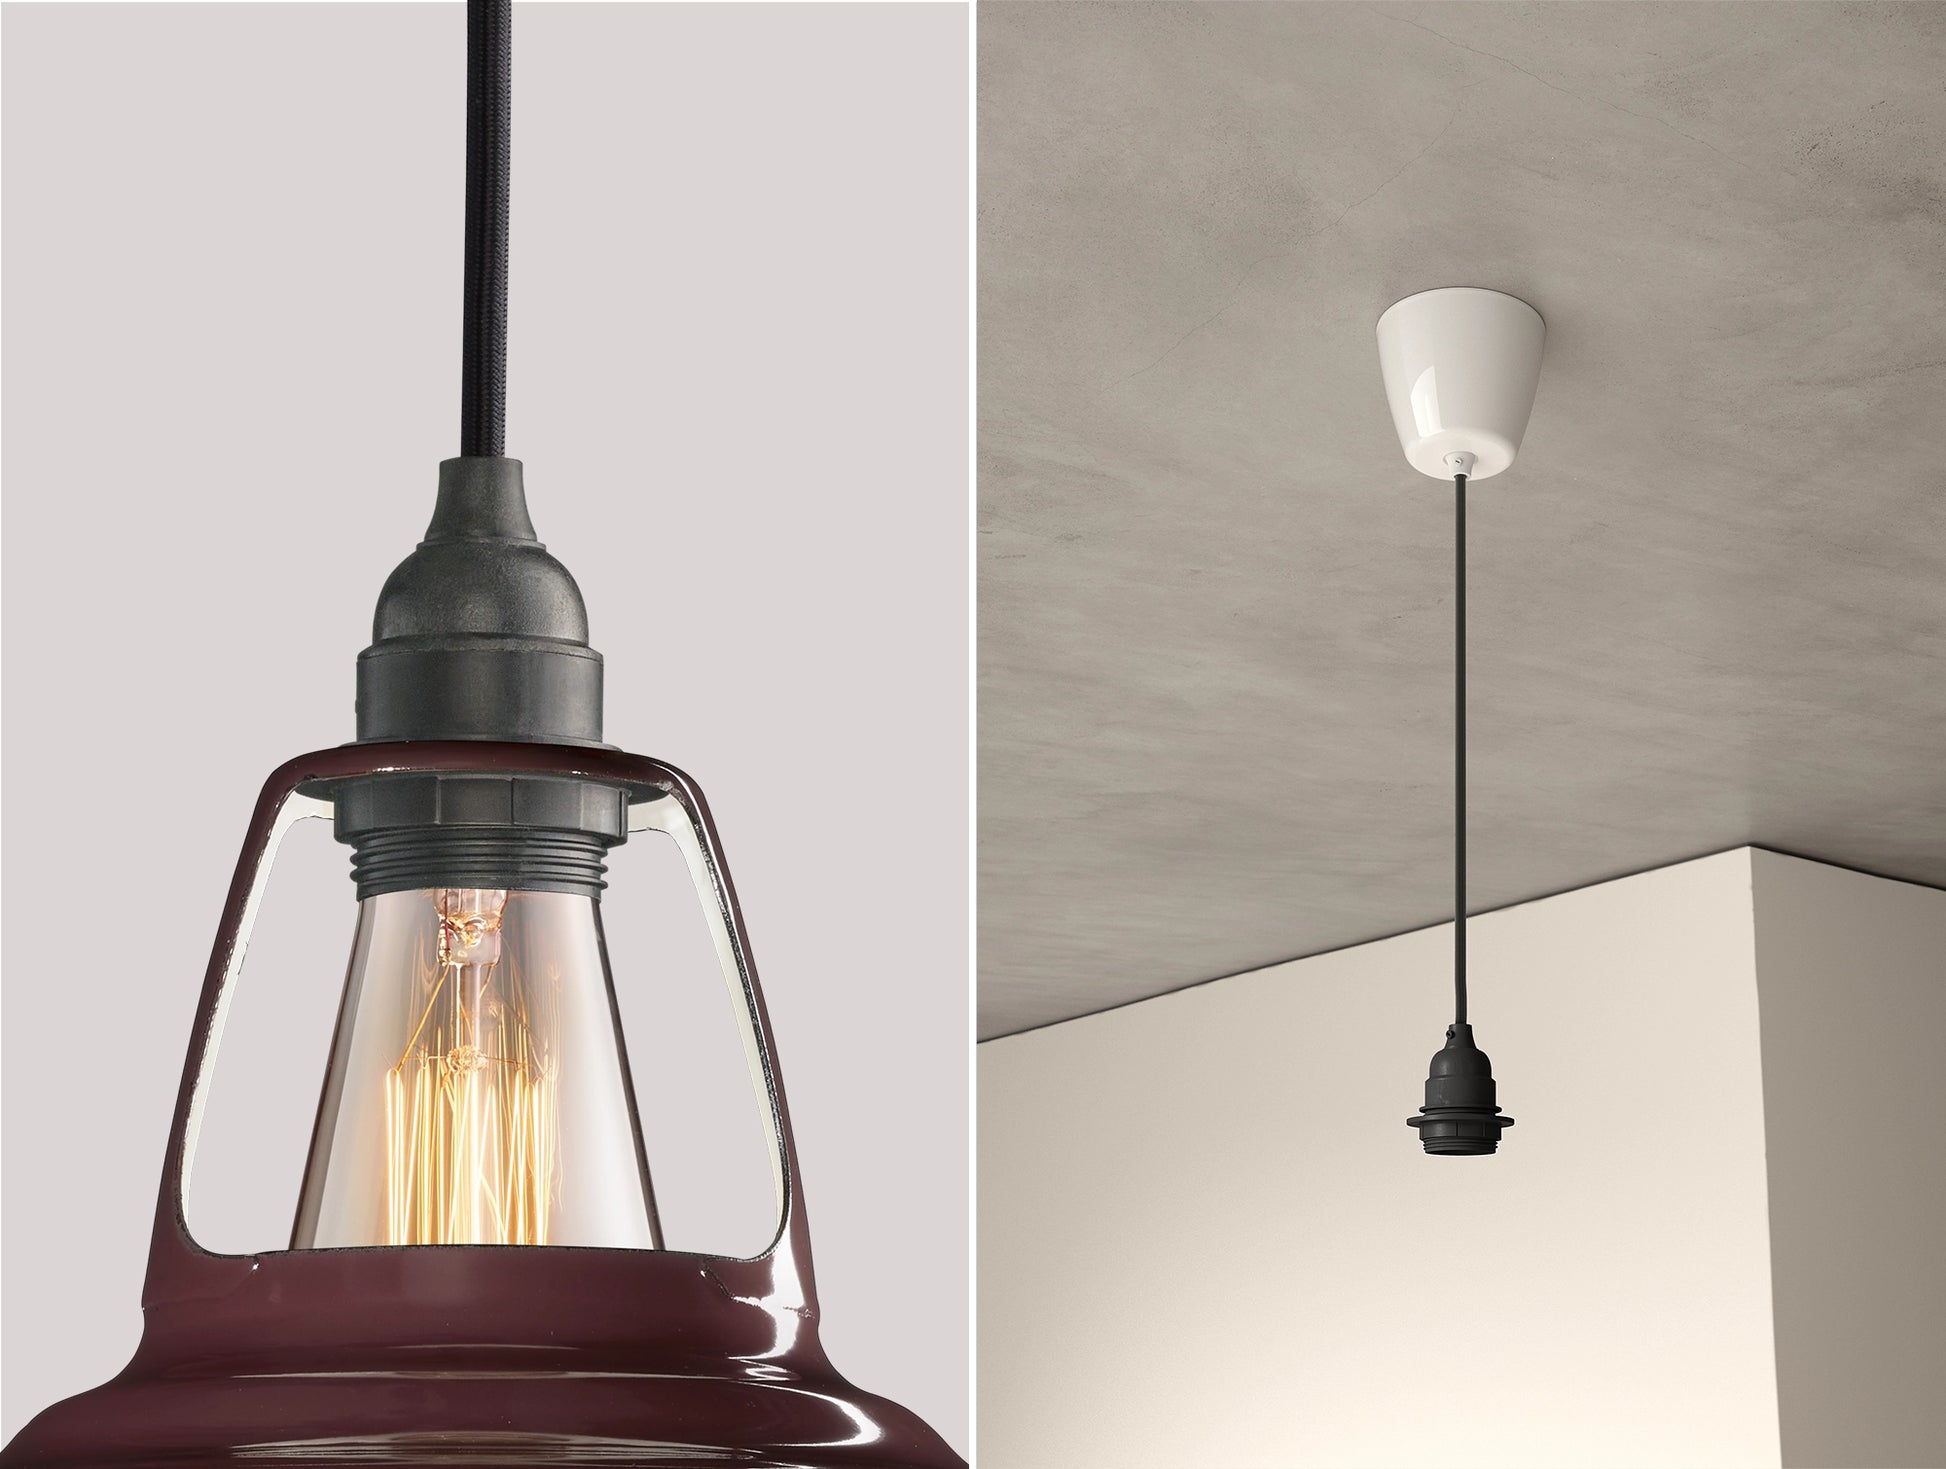 Close up of an E27 Industrial suspension set on a Metropolitan lampshade on the left. On the right, an E27 Industrial pendant set is hanging from the ceiling